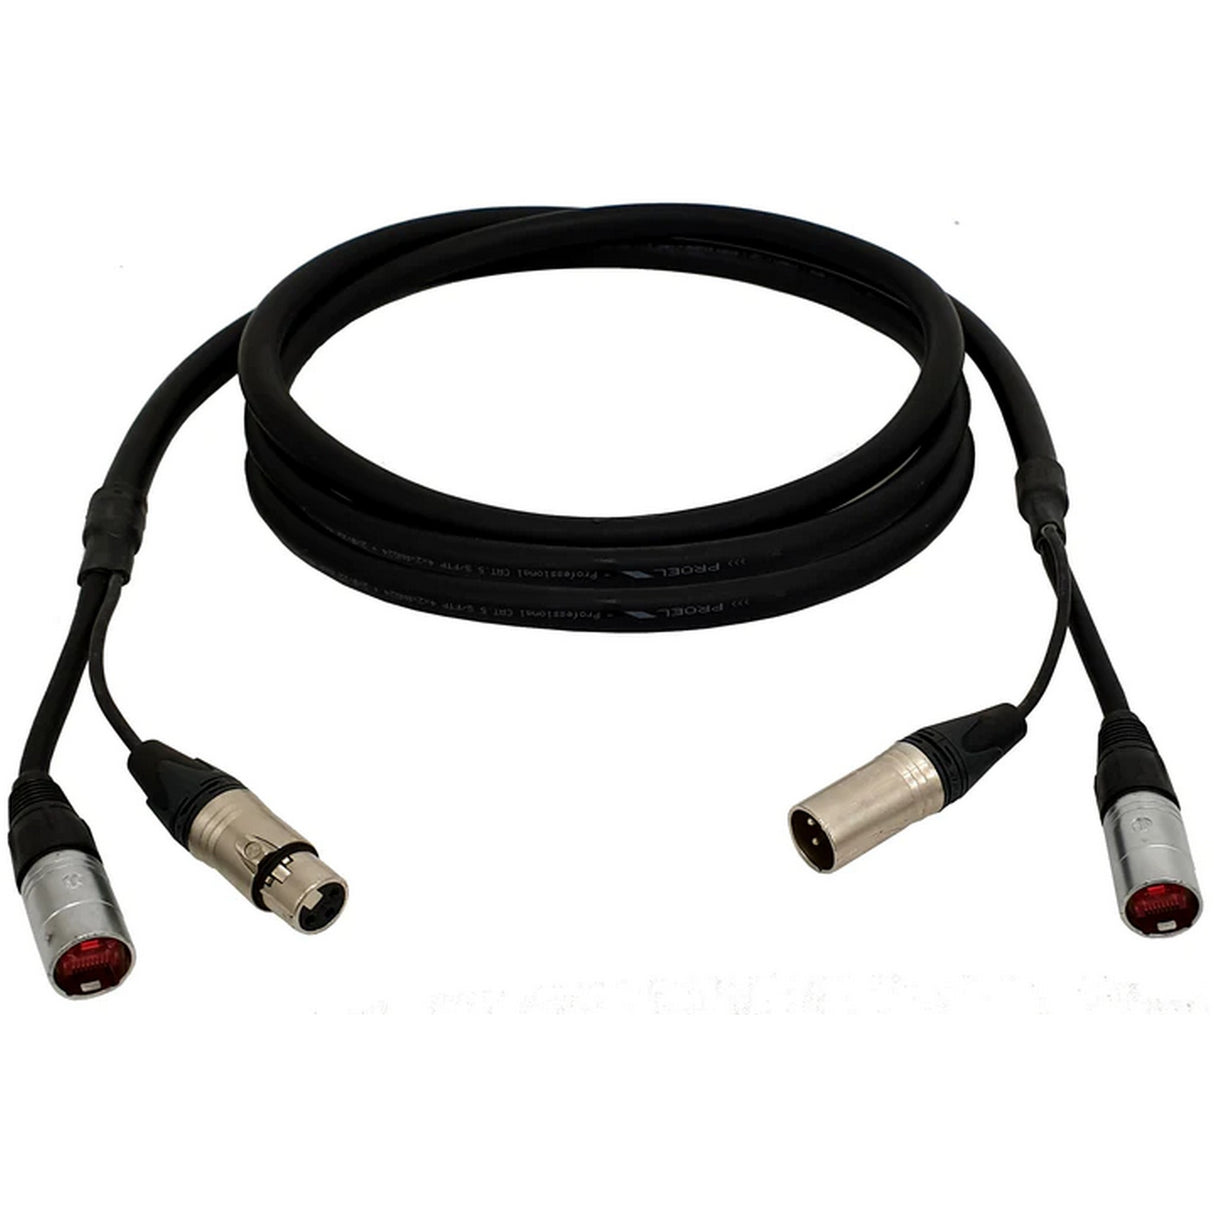 Axiom AR100LU10 Audio and Remote Cable for Linking Flying Speakers to Floor Subwoofers, 32.8-Feet